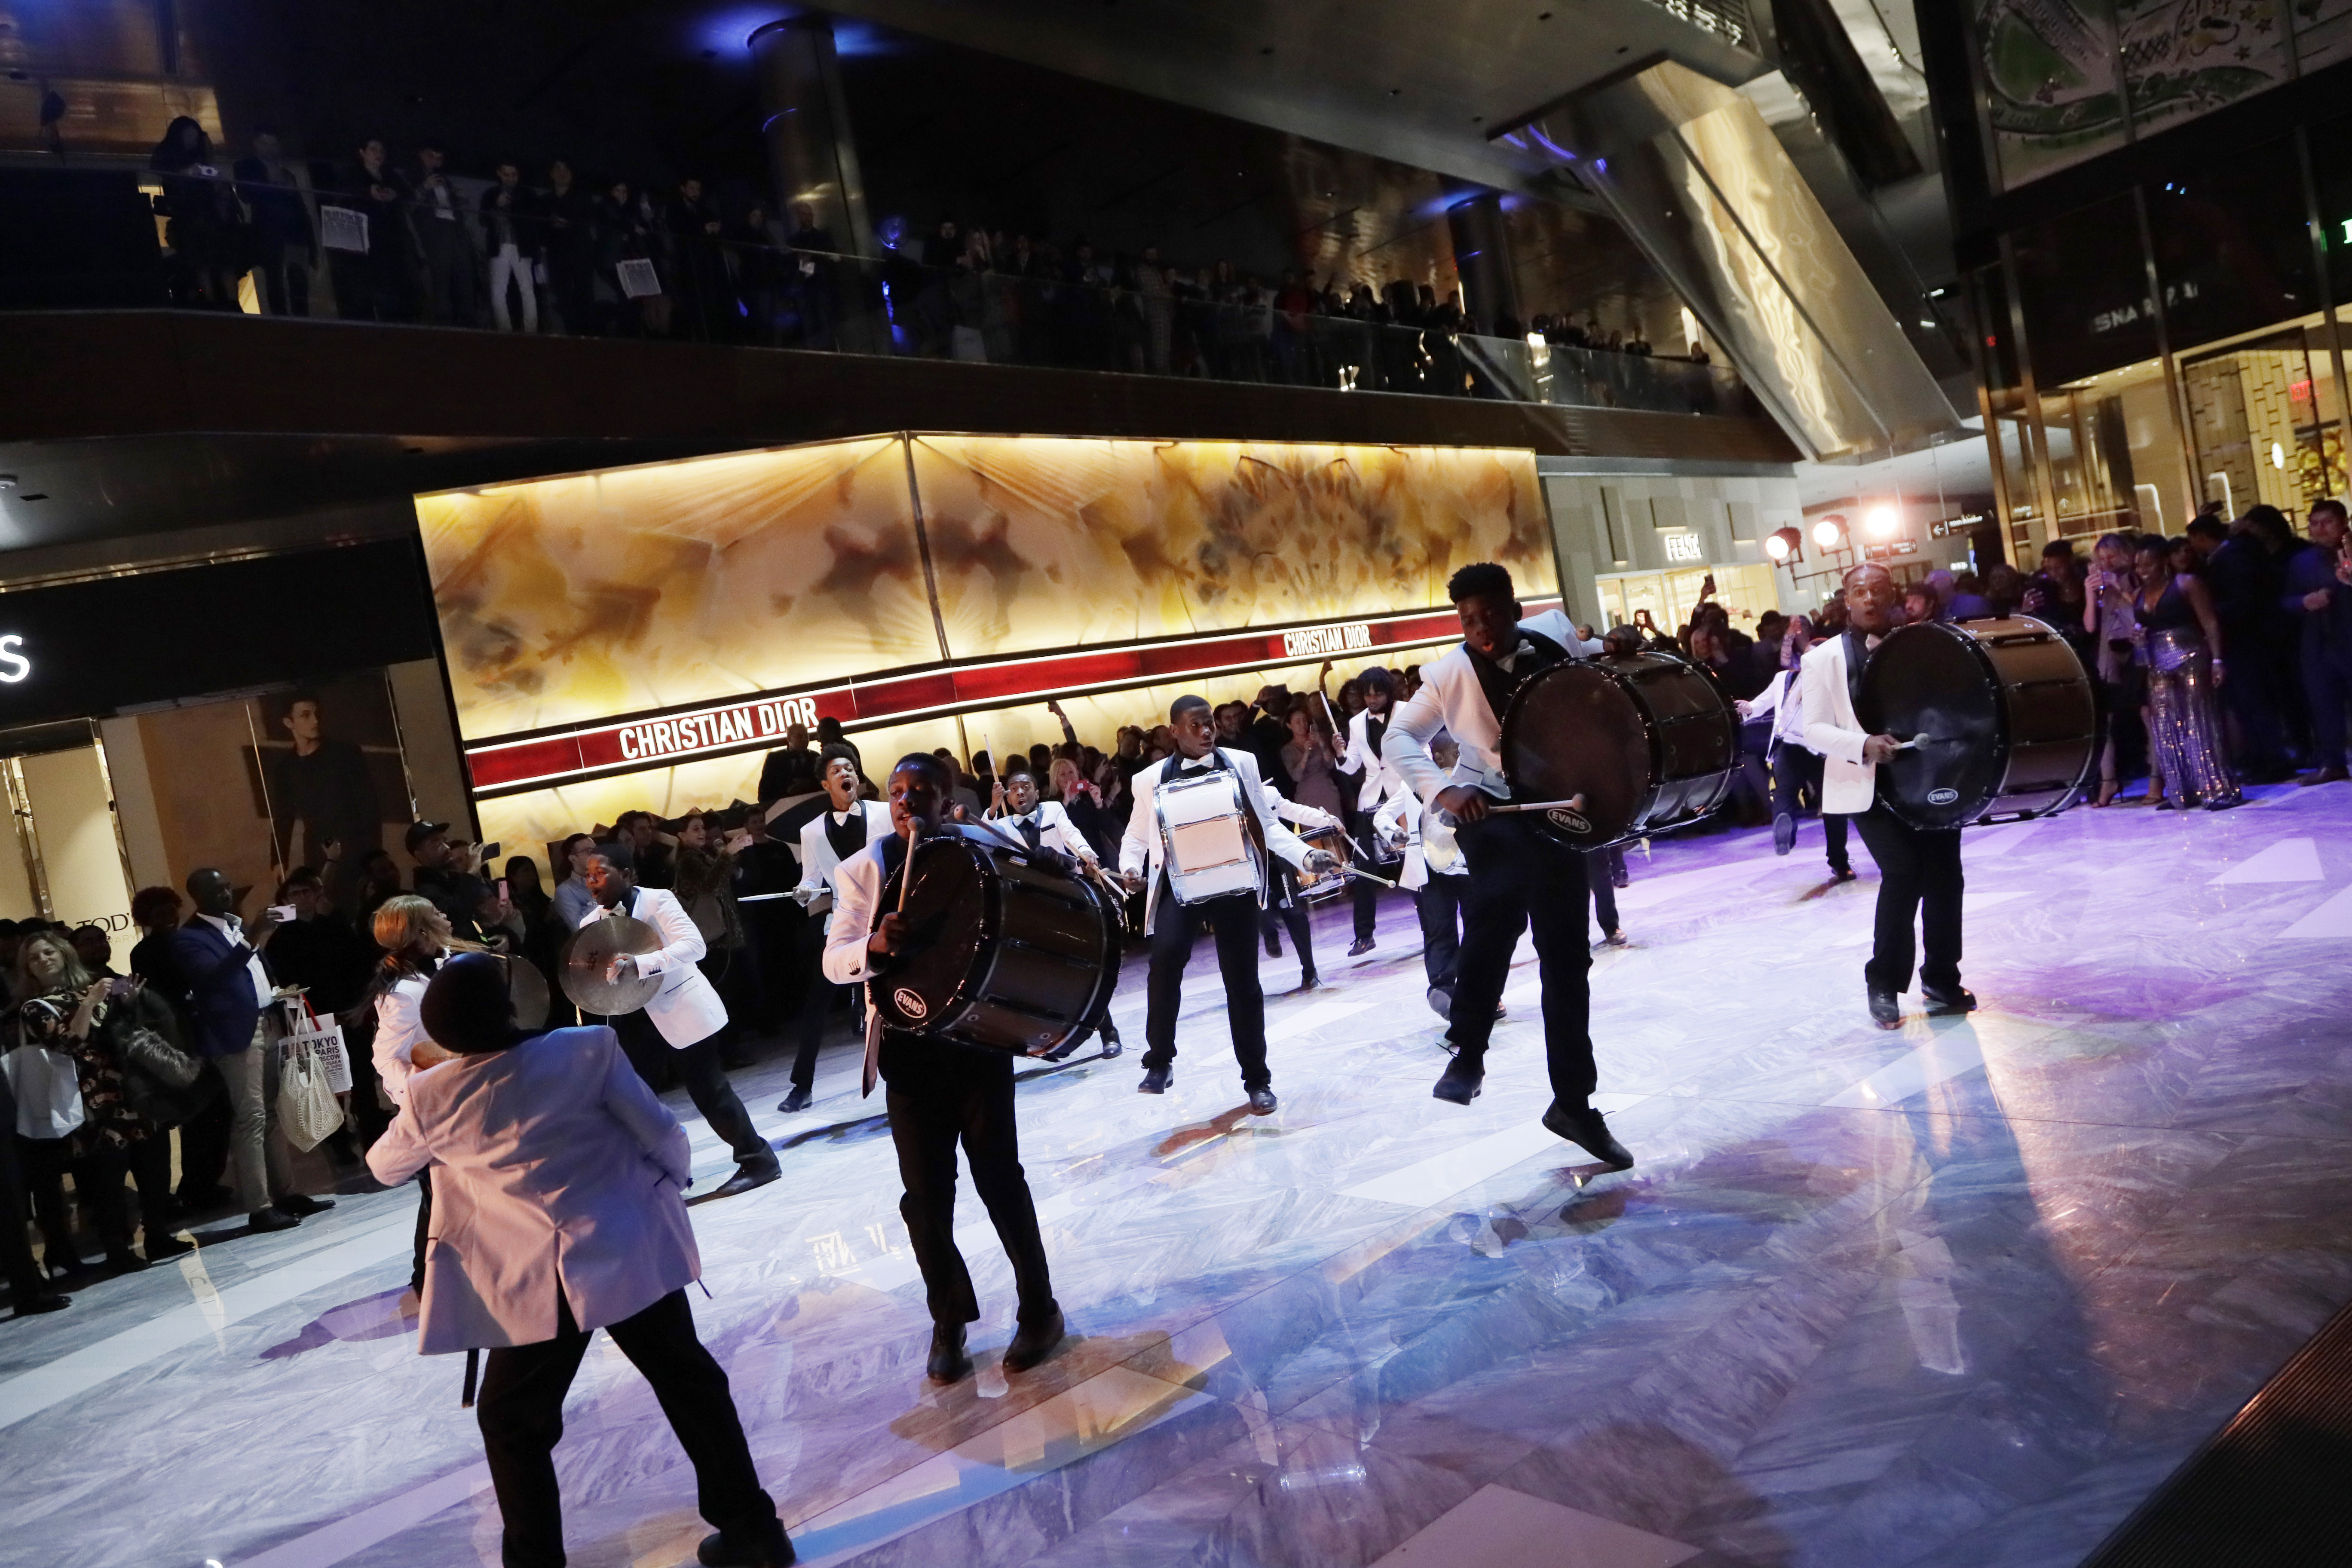 The United Marching Band performs for the opening night of The Shops & Restaurants at Hudson Yards, Thursday, March 14, 2019, in New York. Hudson Yards, a $25 billion urban complex on Manhattan's west side, is the city's most ambitious development since the rebuilding of the World Trade Center. When fully complete, the 28-acre site will include 16 towers of homes and offices, a hotel, a school, the highest outdoor observation deck in the Western Hemisphere, a performing arts center and the shopping mall. (AP Photo/Mark Lennihan)